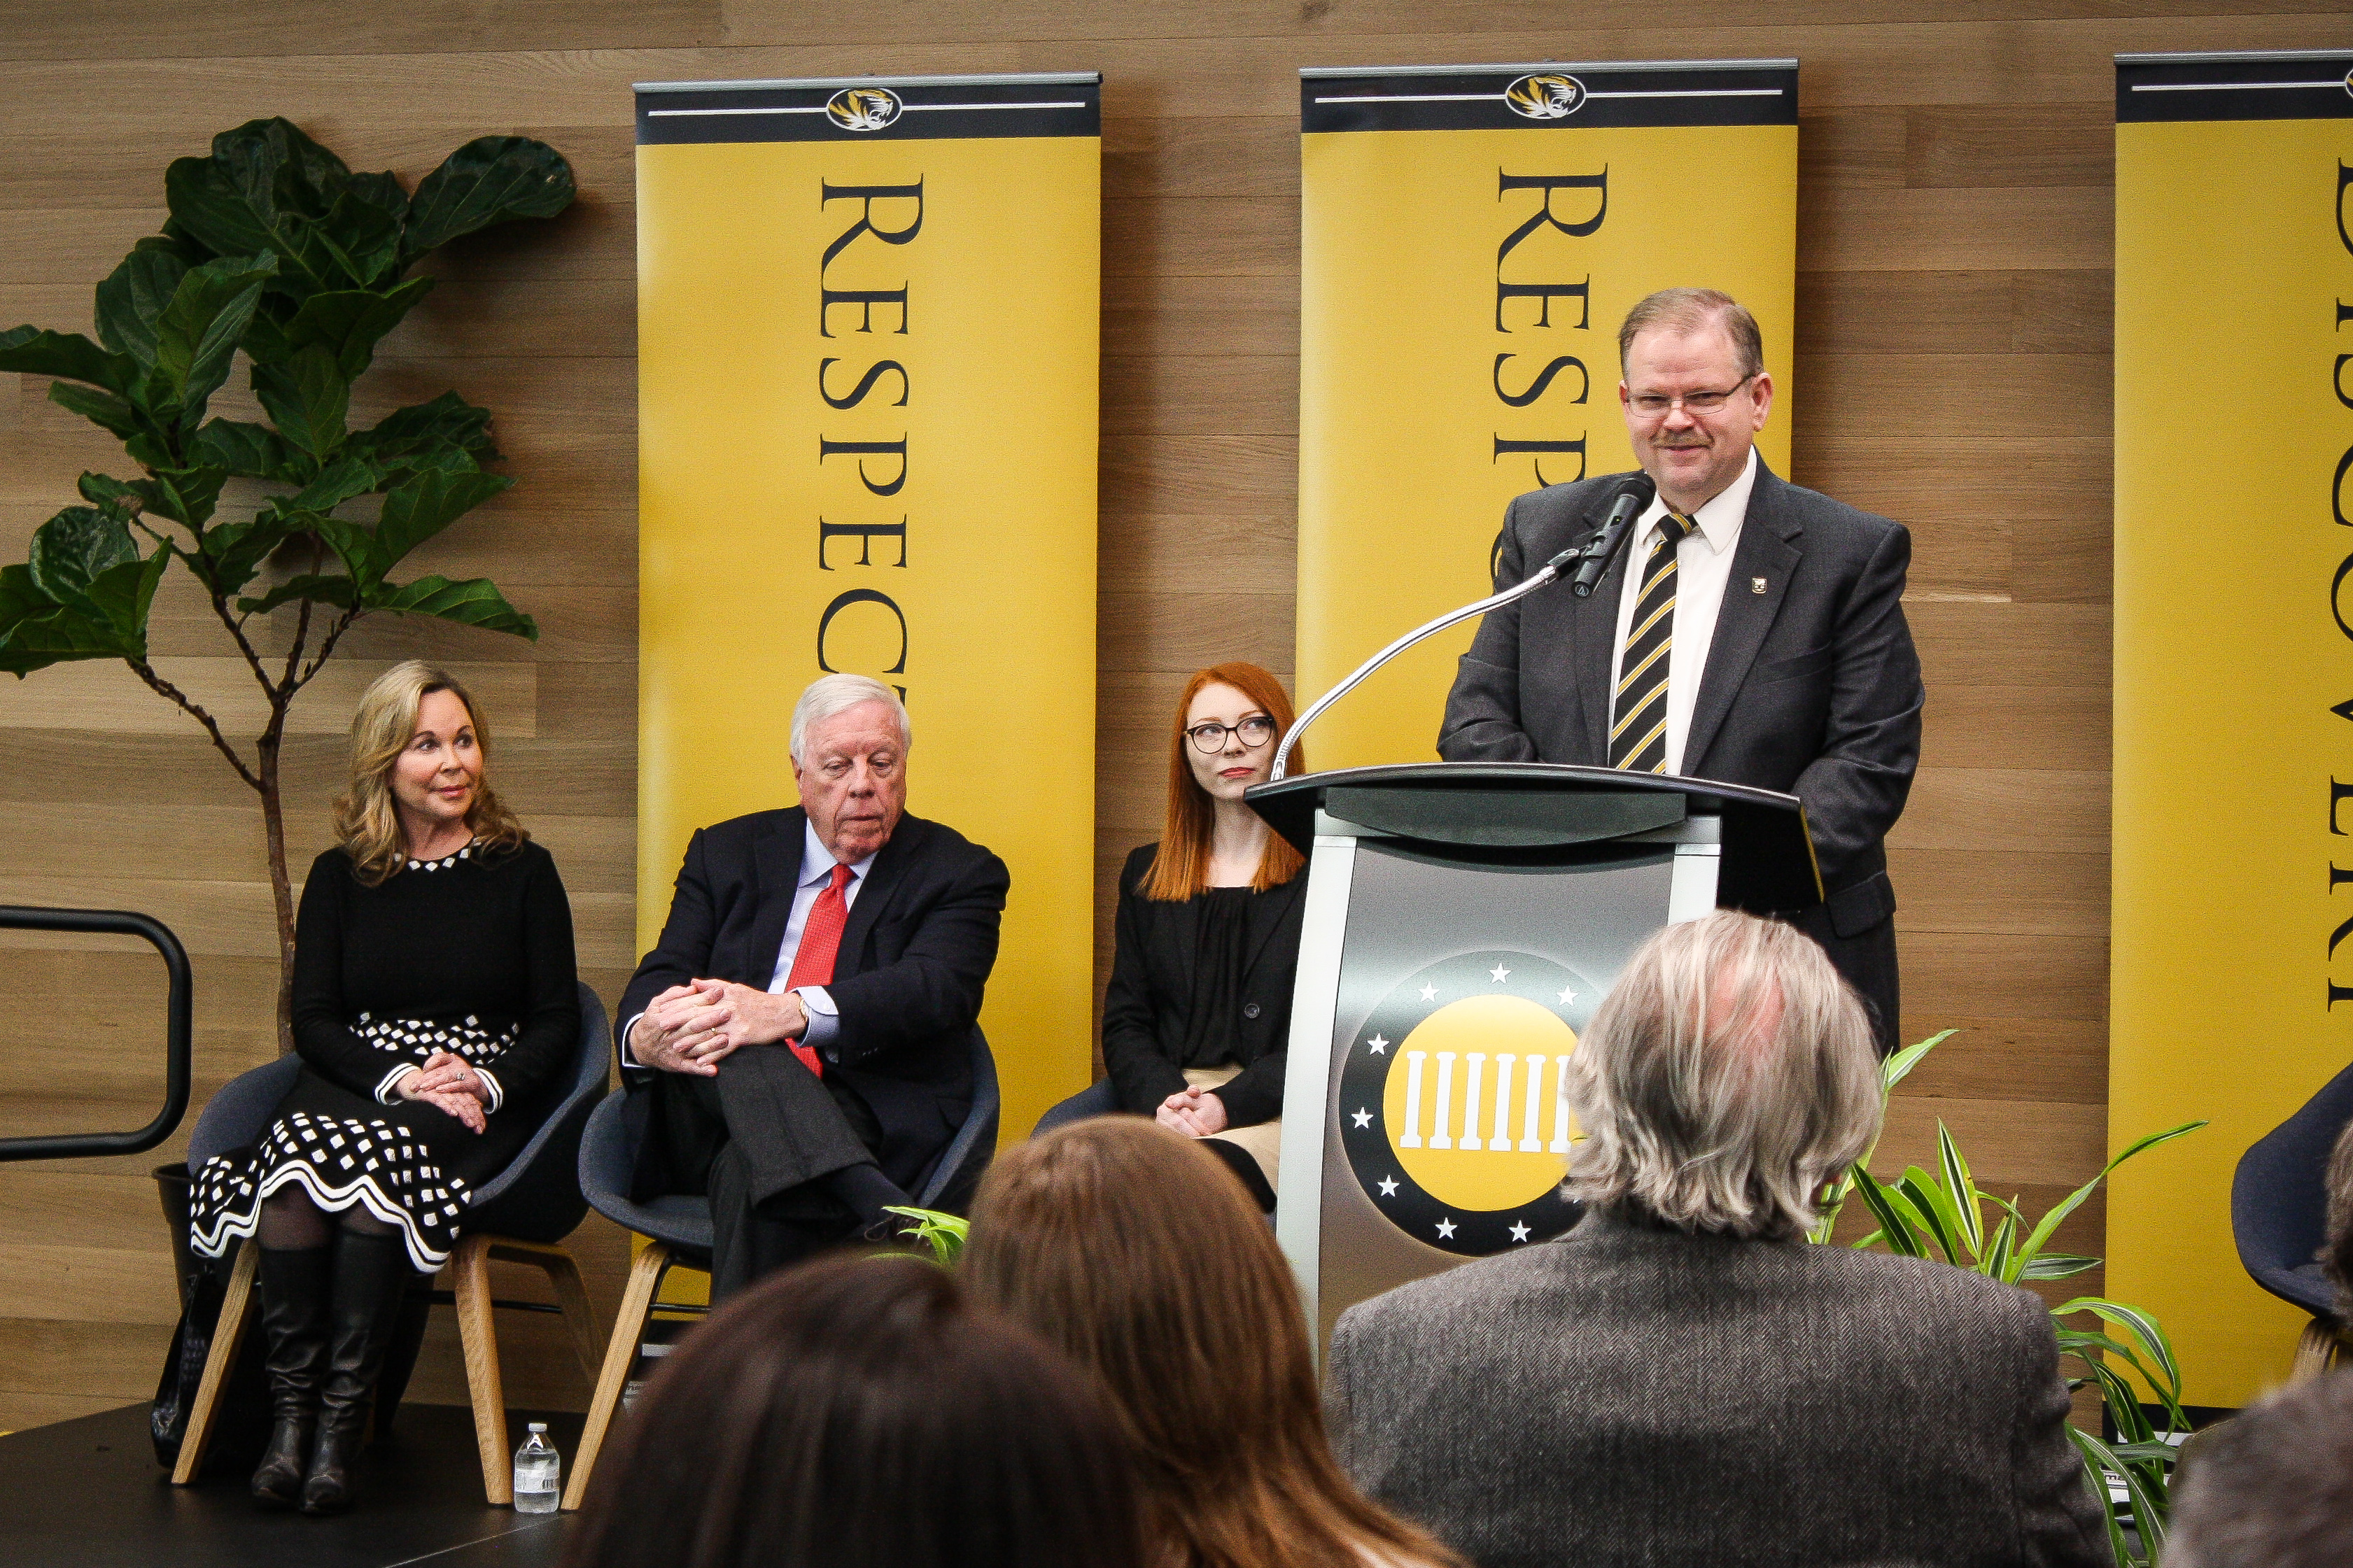 During the press conference, Chancellor Alexander N. Cartwright said that the support from the Kinder Foundation has established Mizzou as a global leader in the study of constitutional democracy. 